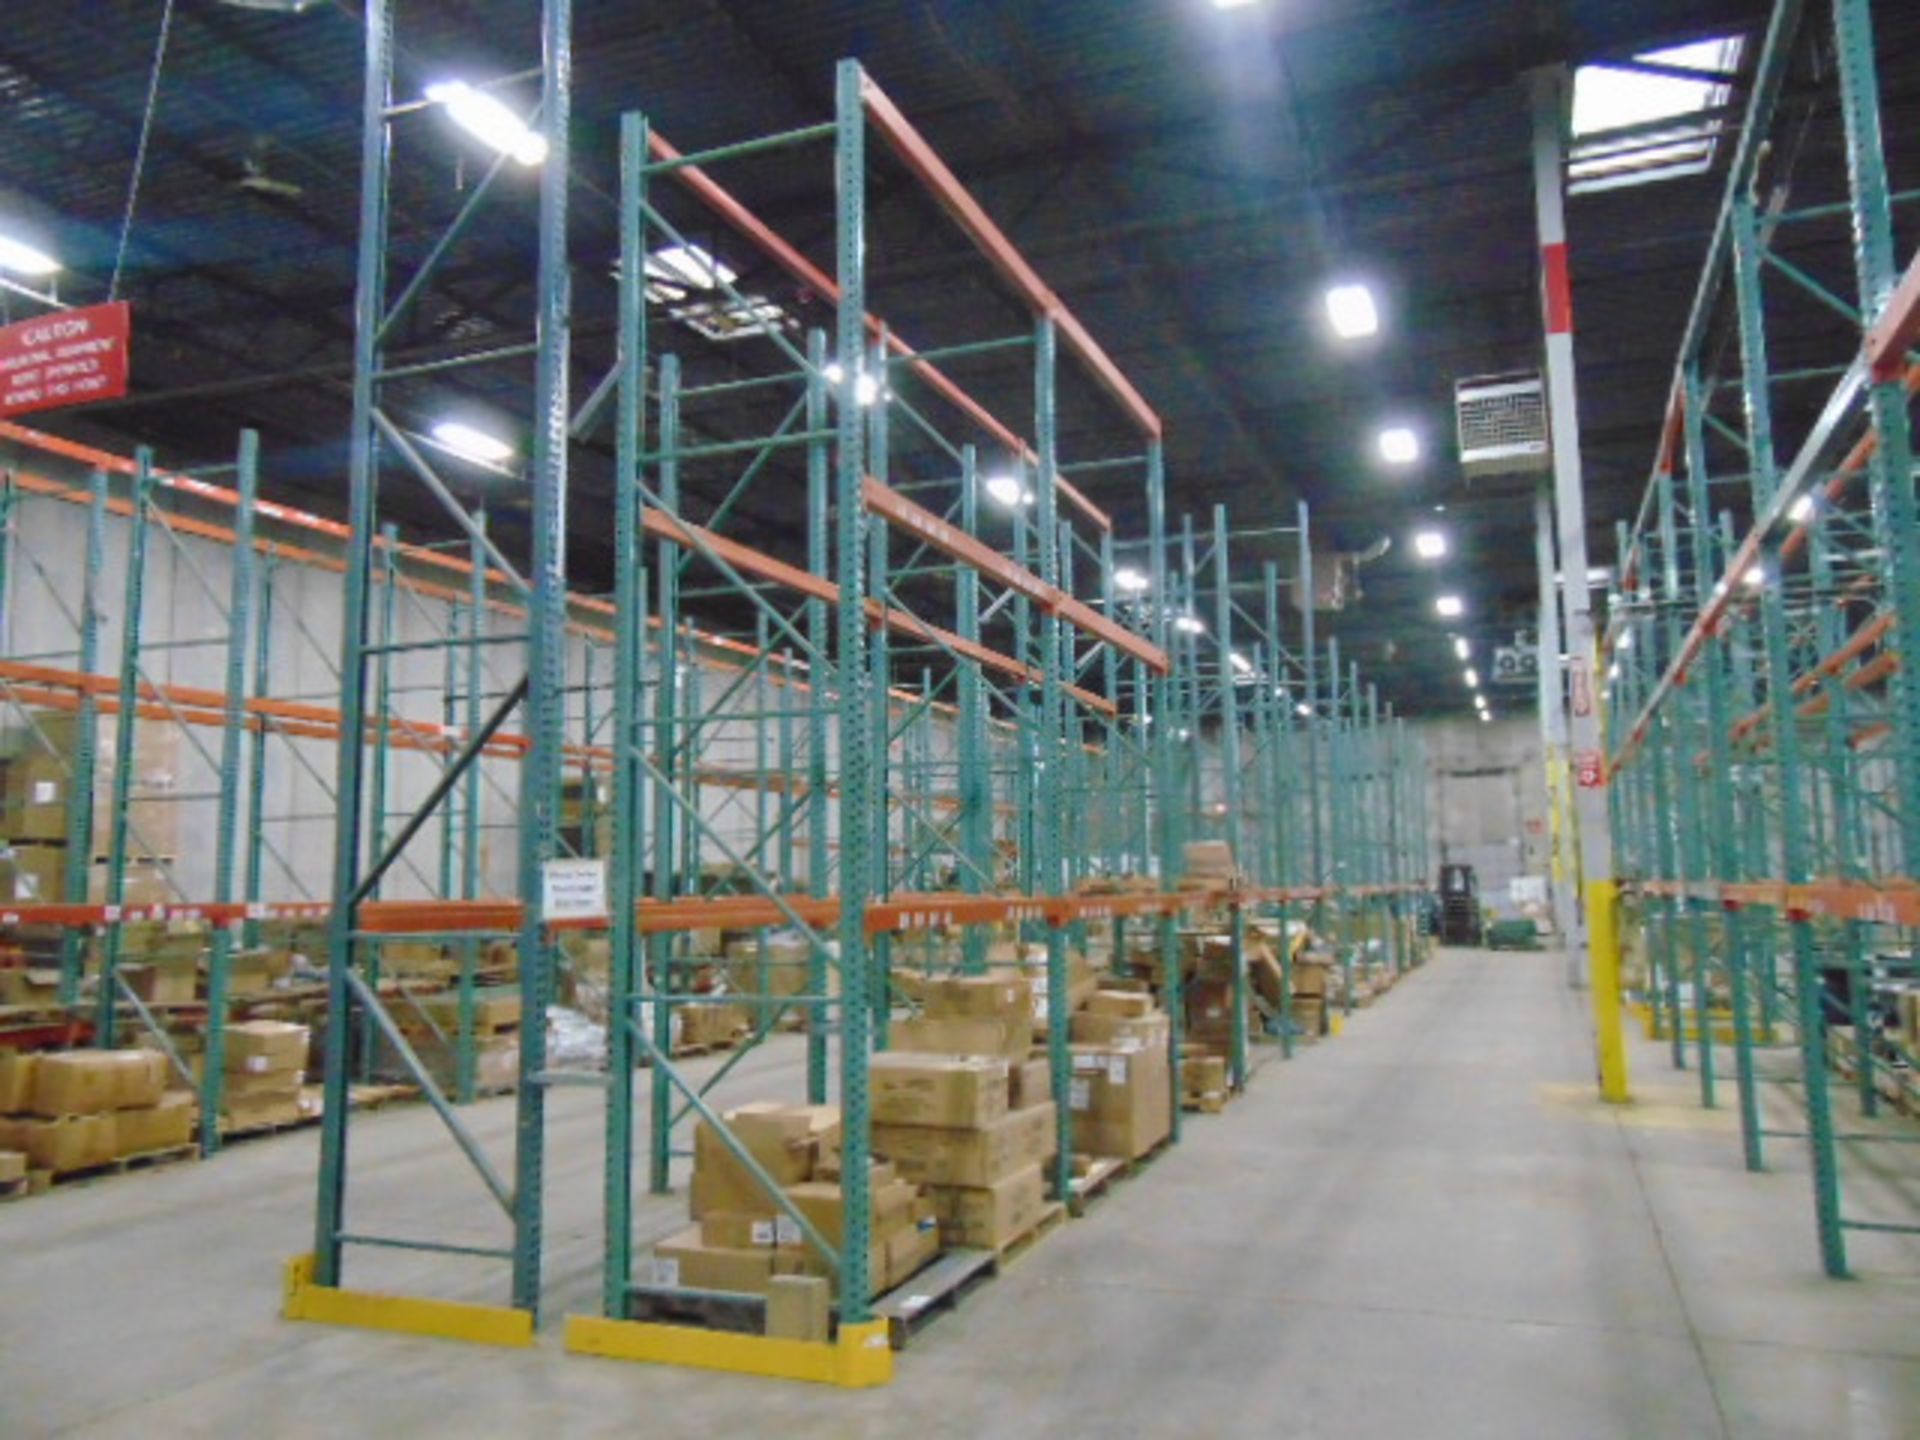 LOT OF PALLET RACK SECTIONS (42), 16' ht. x 92"W. x 42" dp. - Image 2 of 3